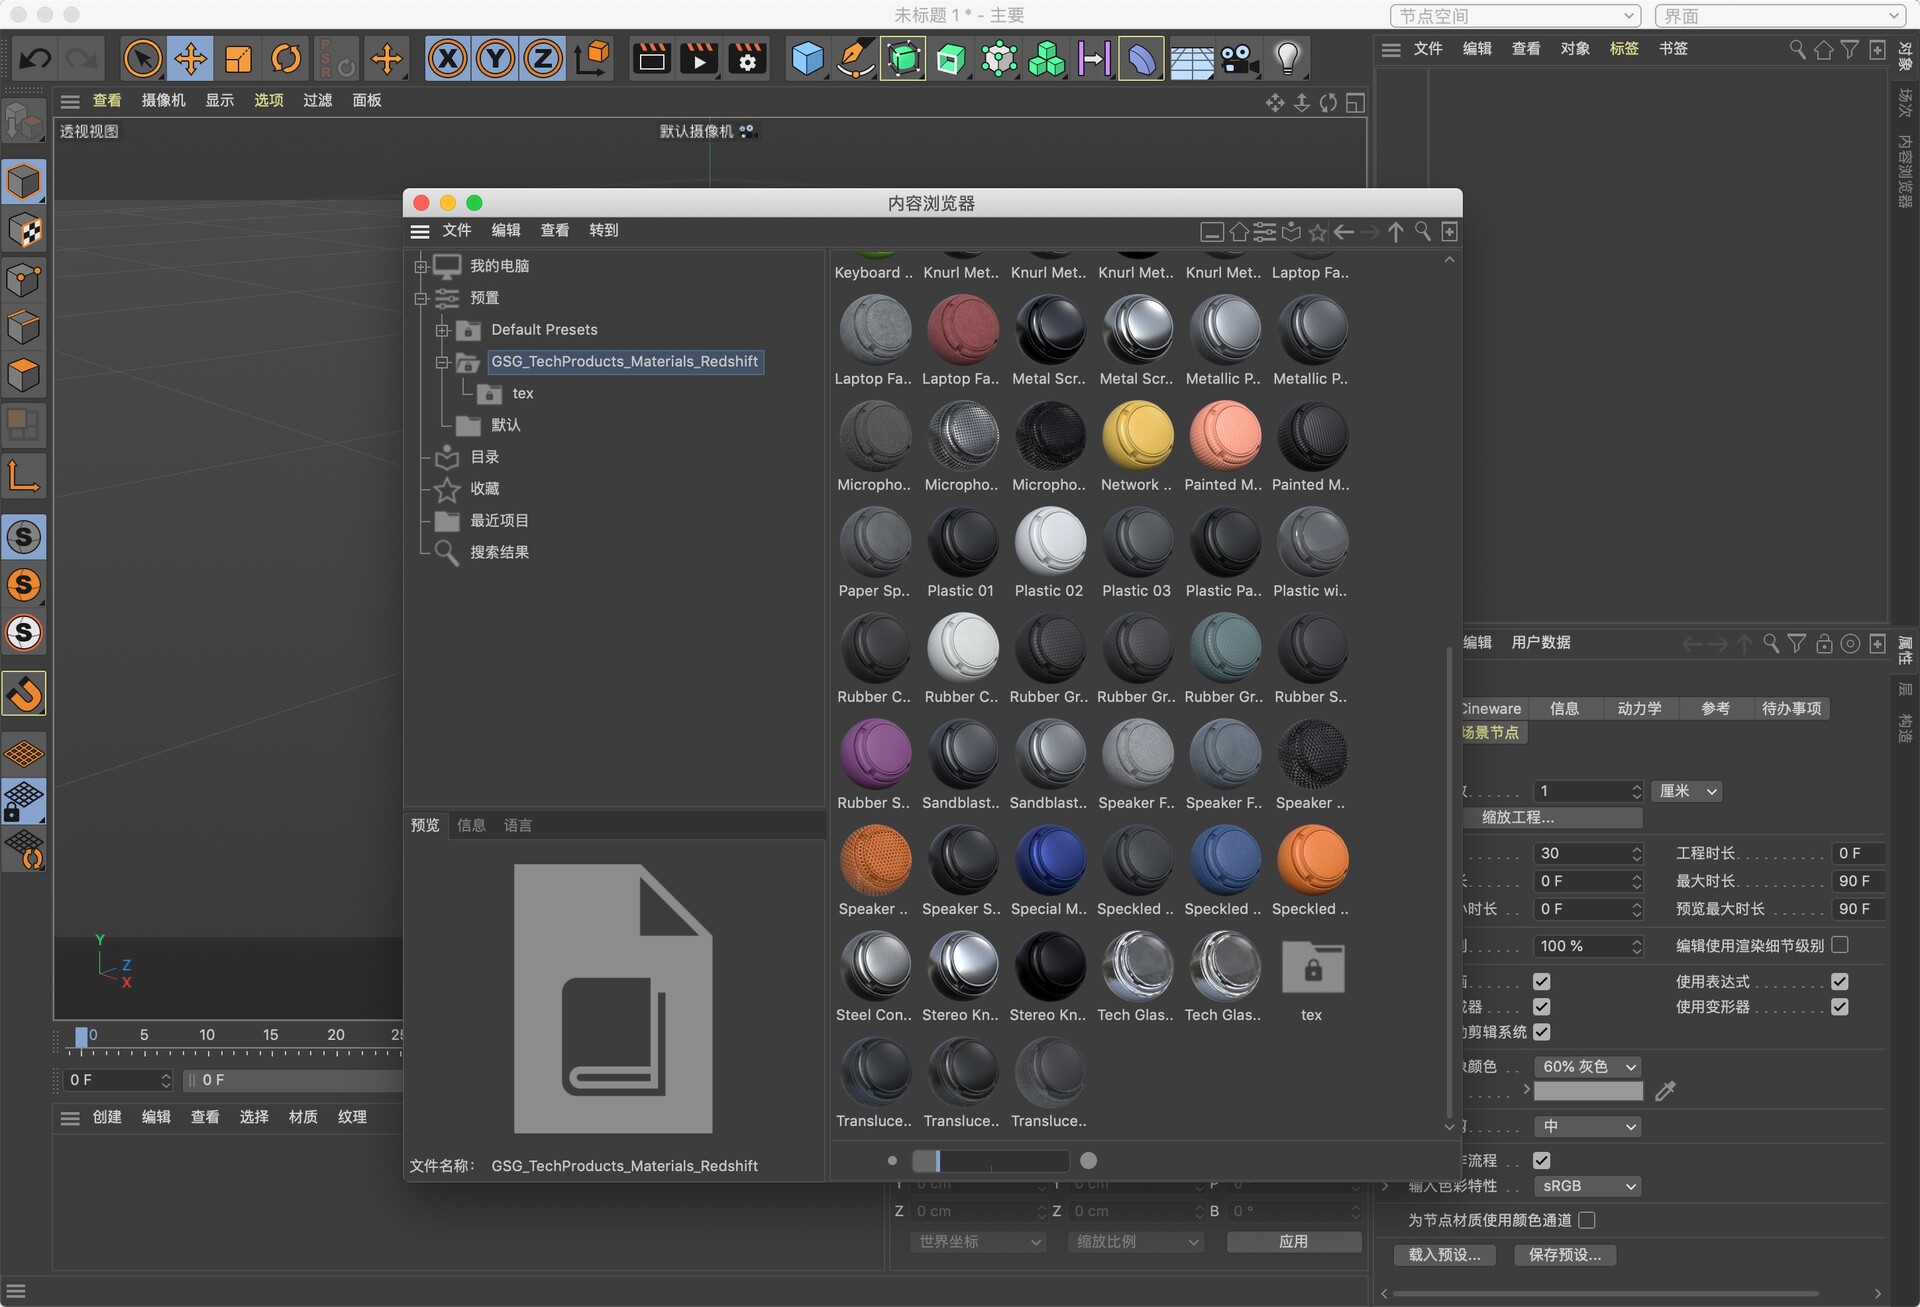 C4D插件：GSG现代科技数码产品材质纹理 TechProducts Materials Collection Redshift